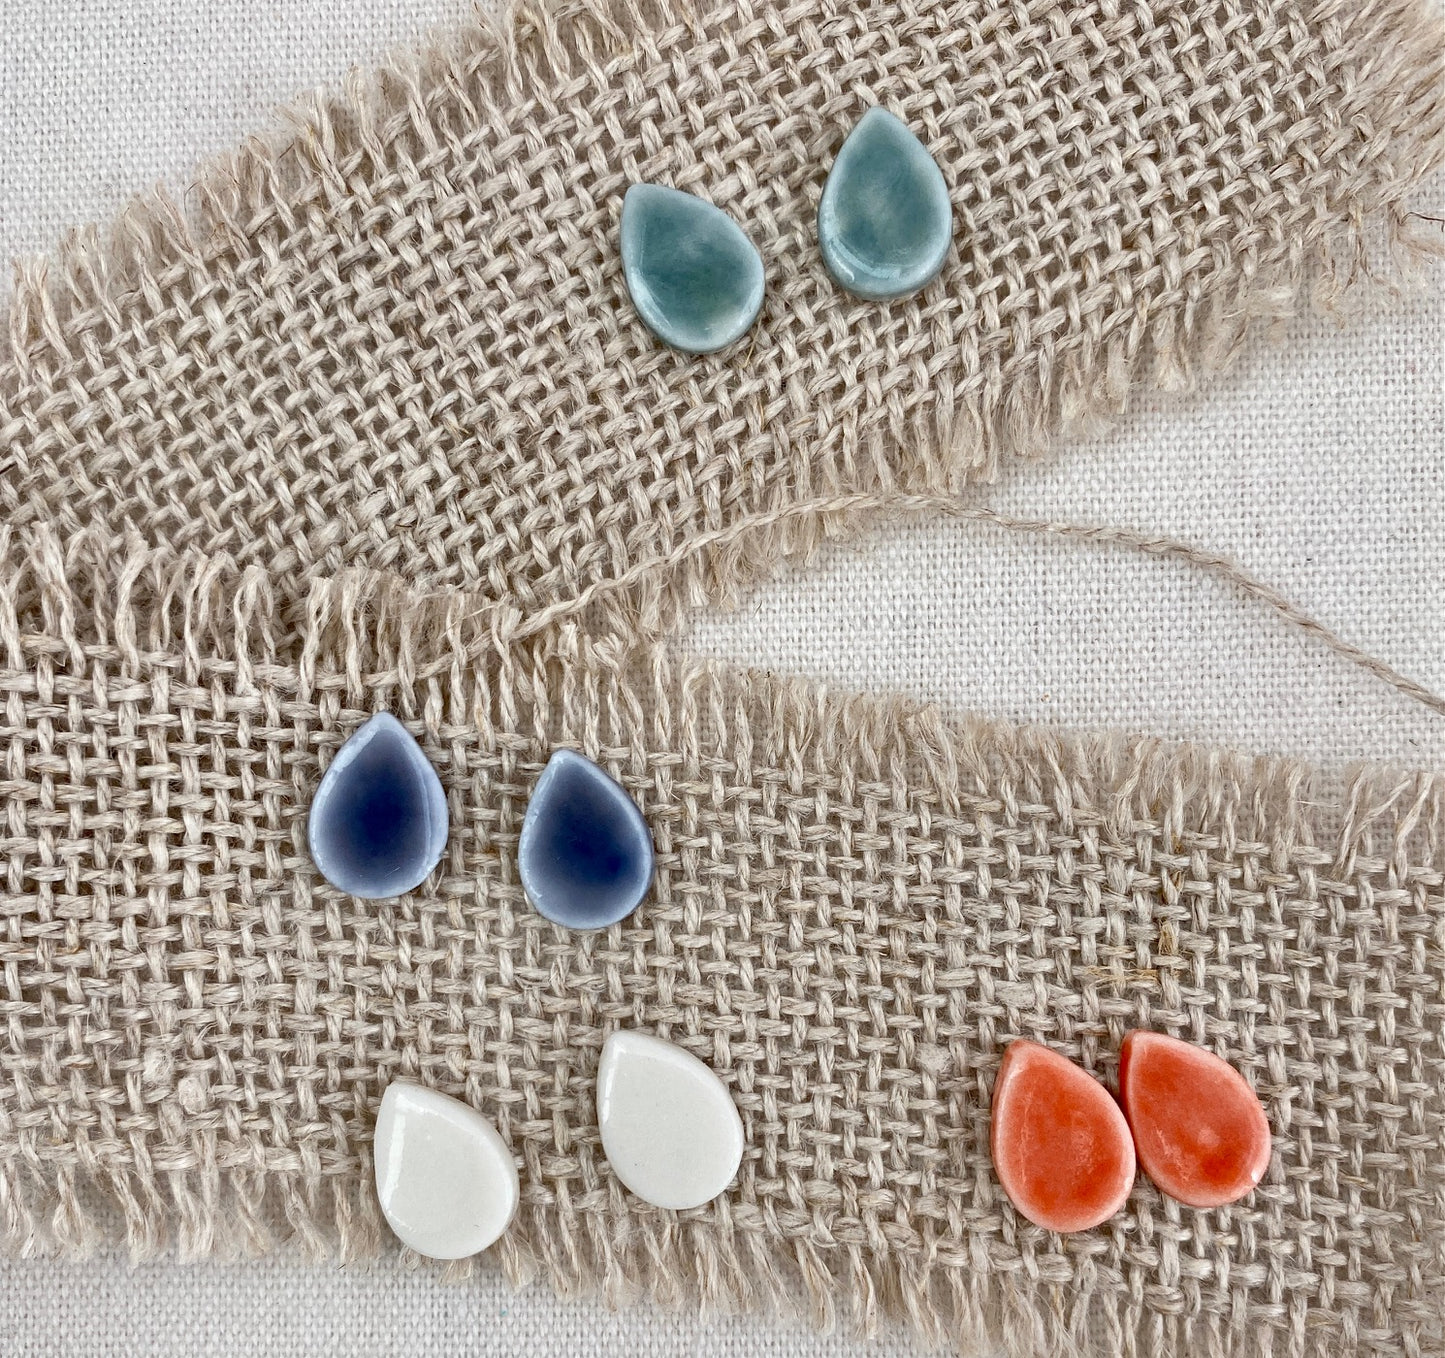 Colorful Teardrop Earrings. Porcelain. For everyday!